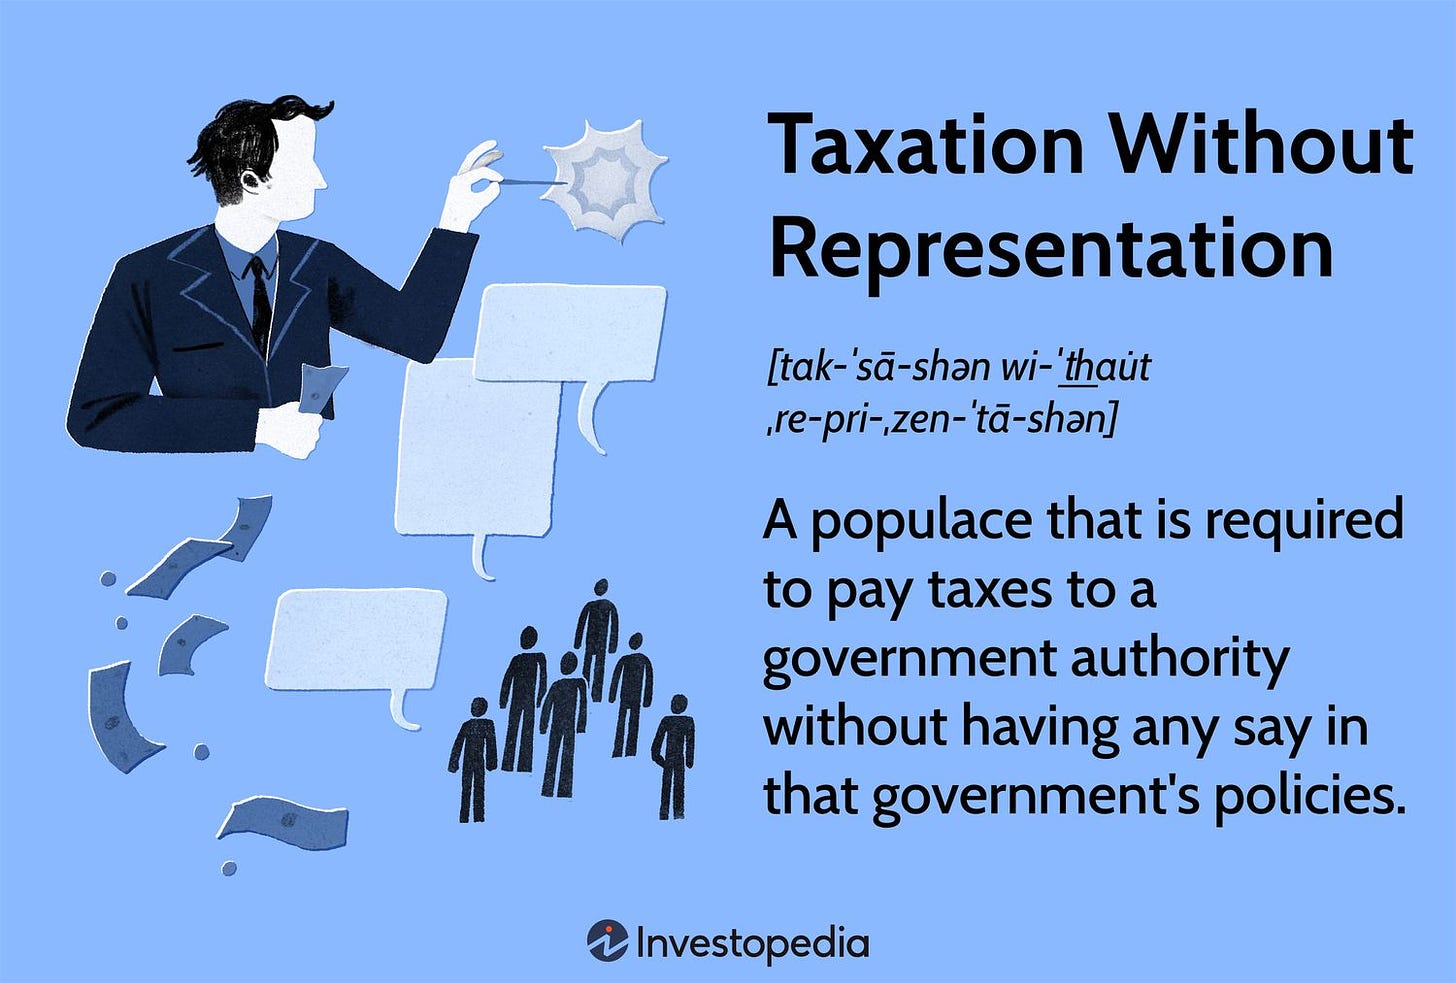 Taxation Without Representation: What It Means and History